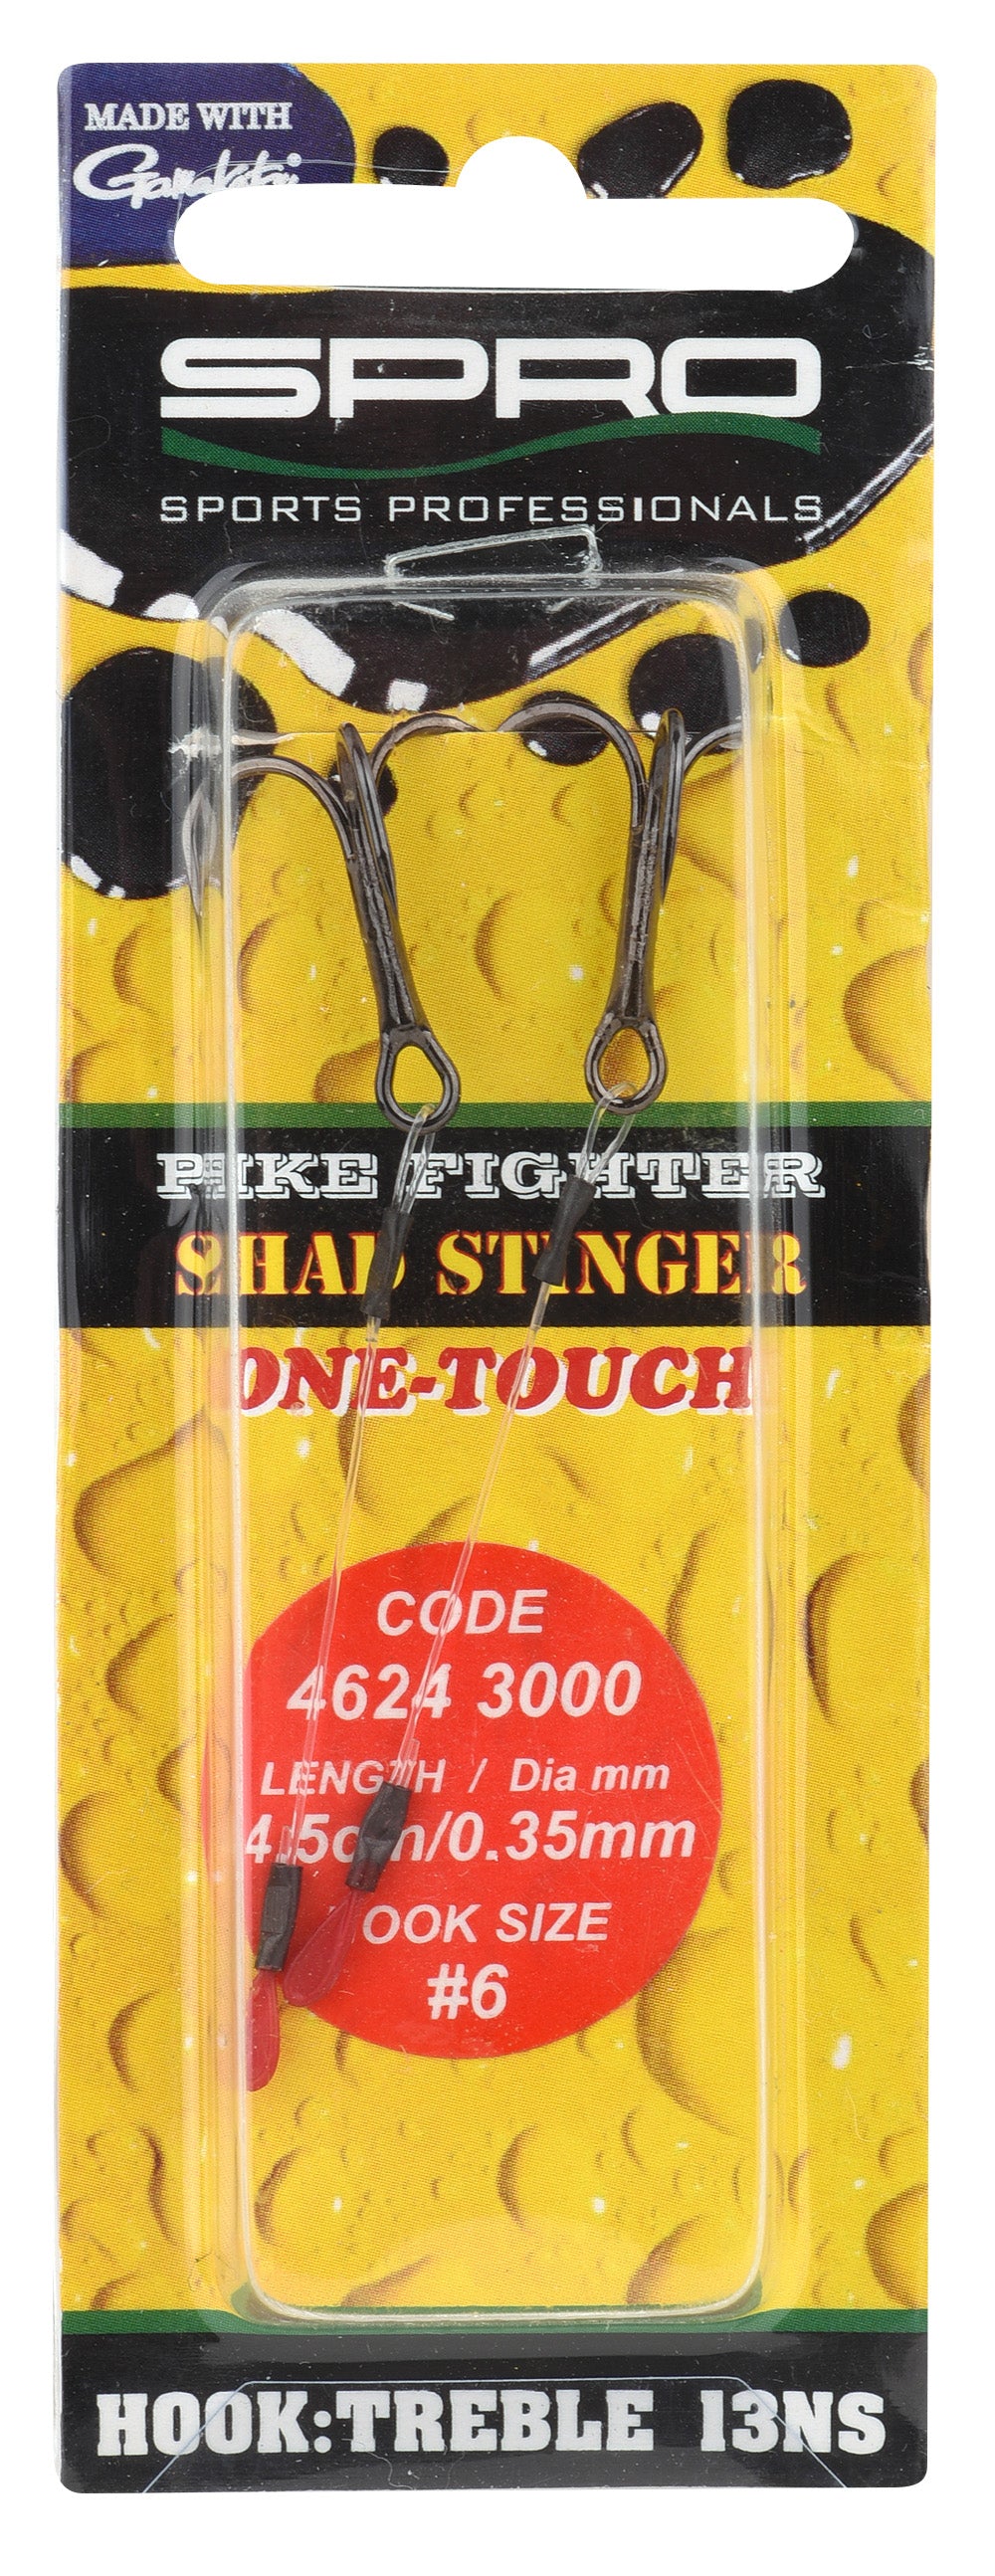 ONE-TOUCH FINE STINGER